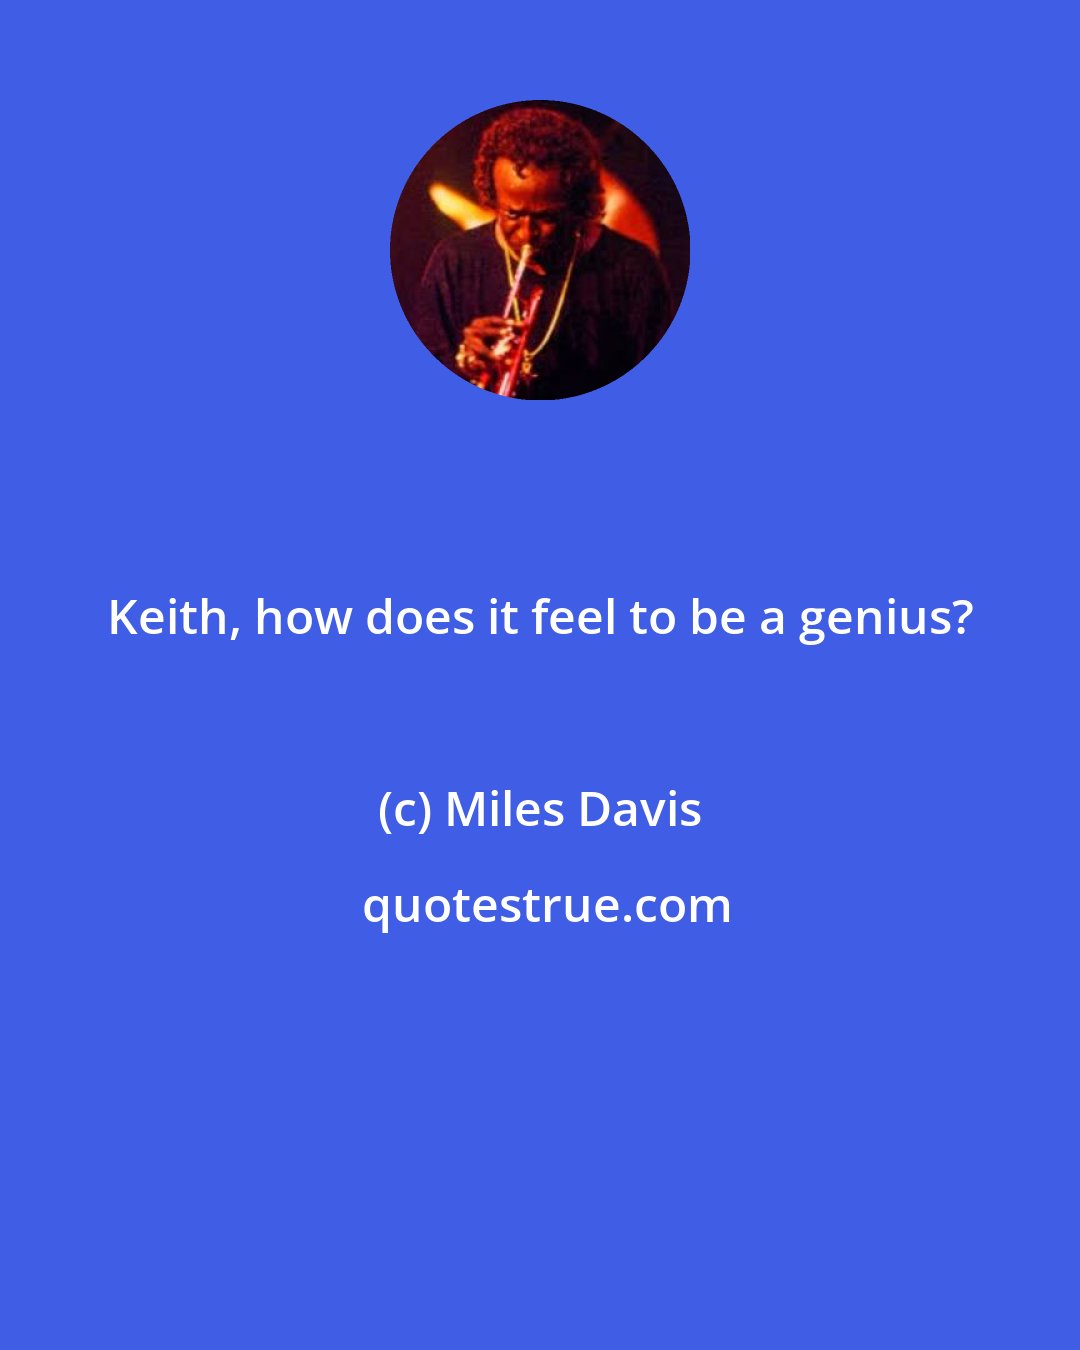 Miles Davis: Keith, how does it feel to be a genius?